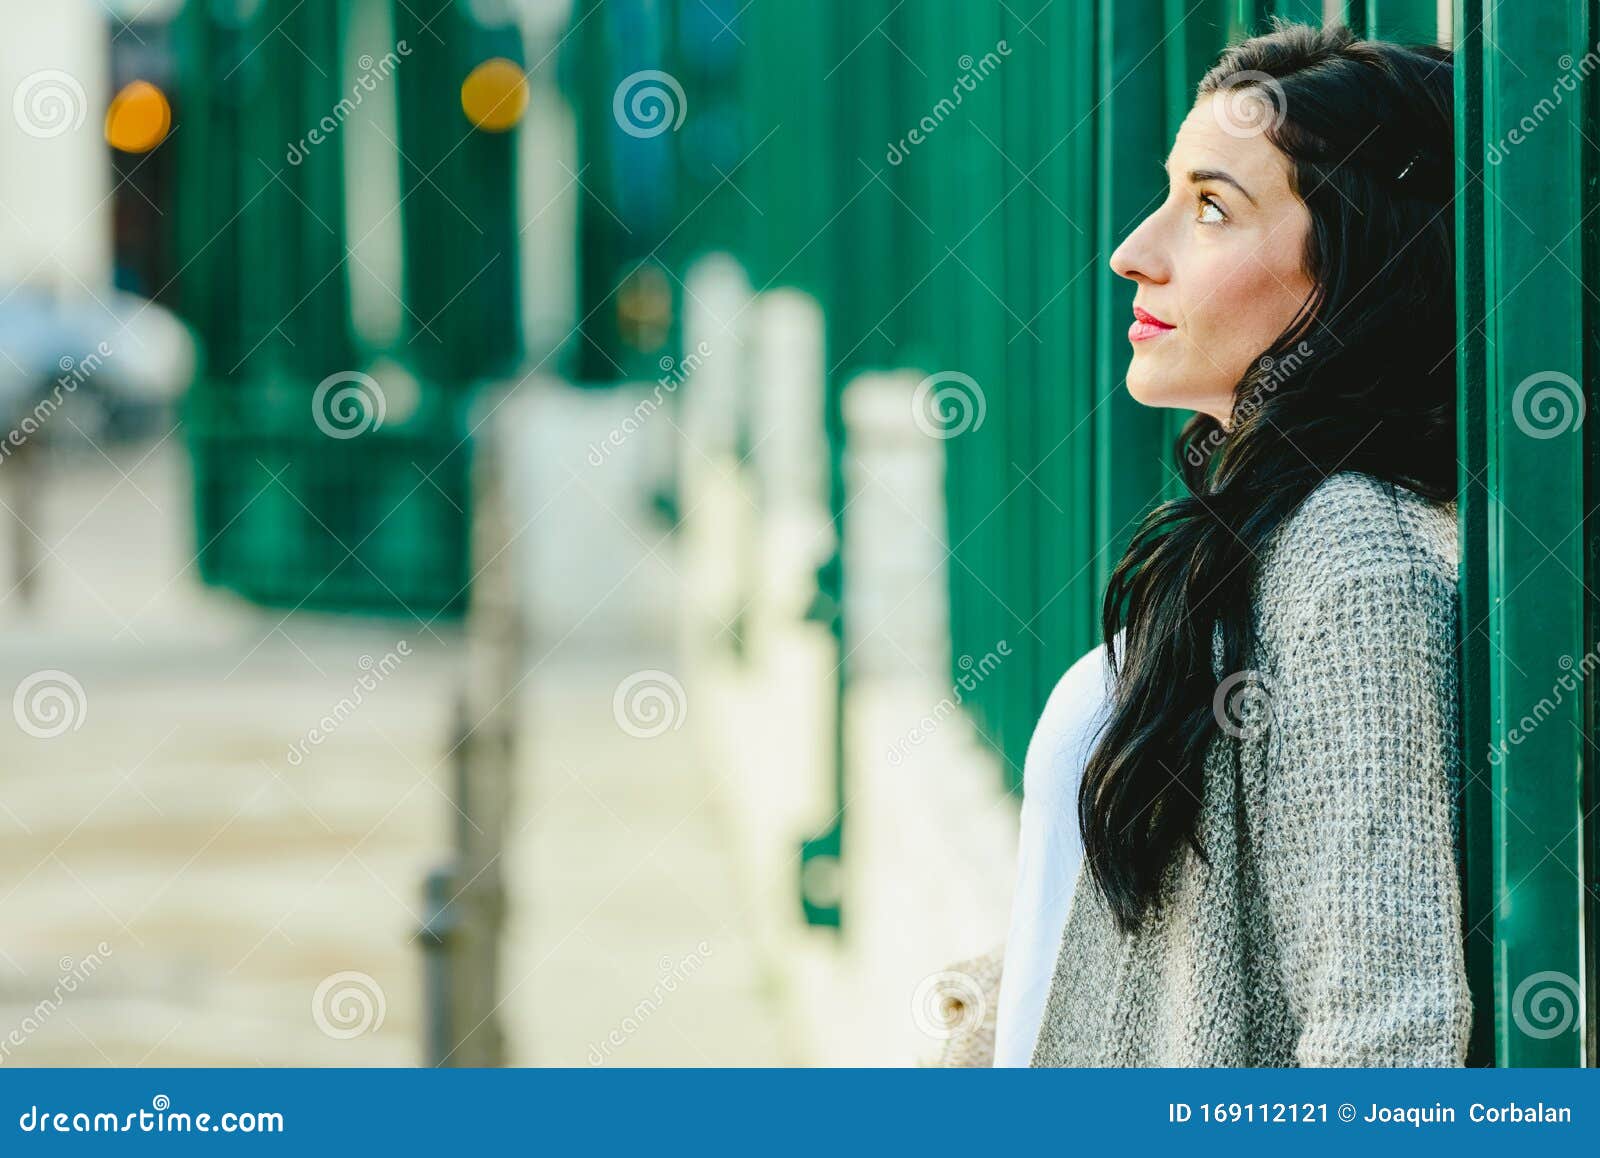 Mature Woman Looking Towards The Sky Stock Image Image Of Outdoors Hair 169112121